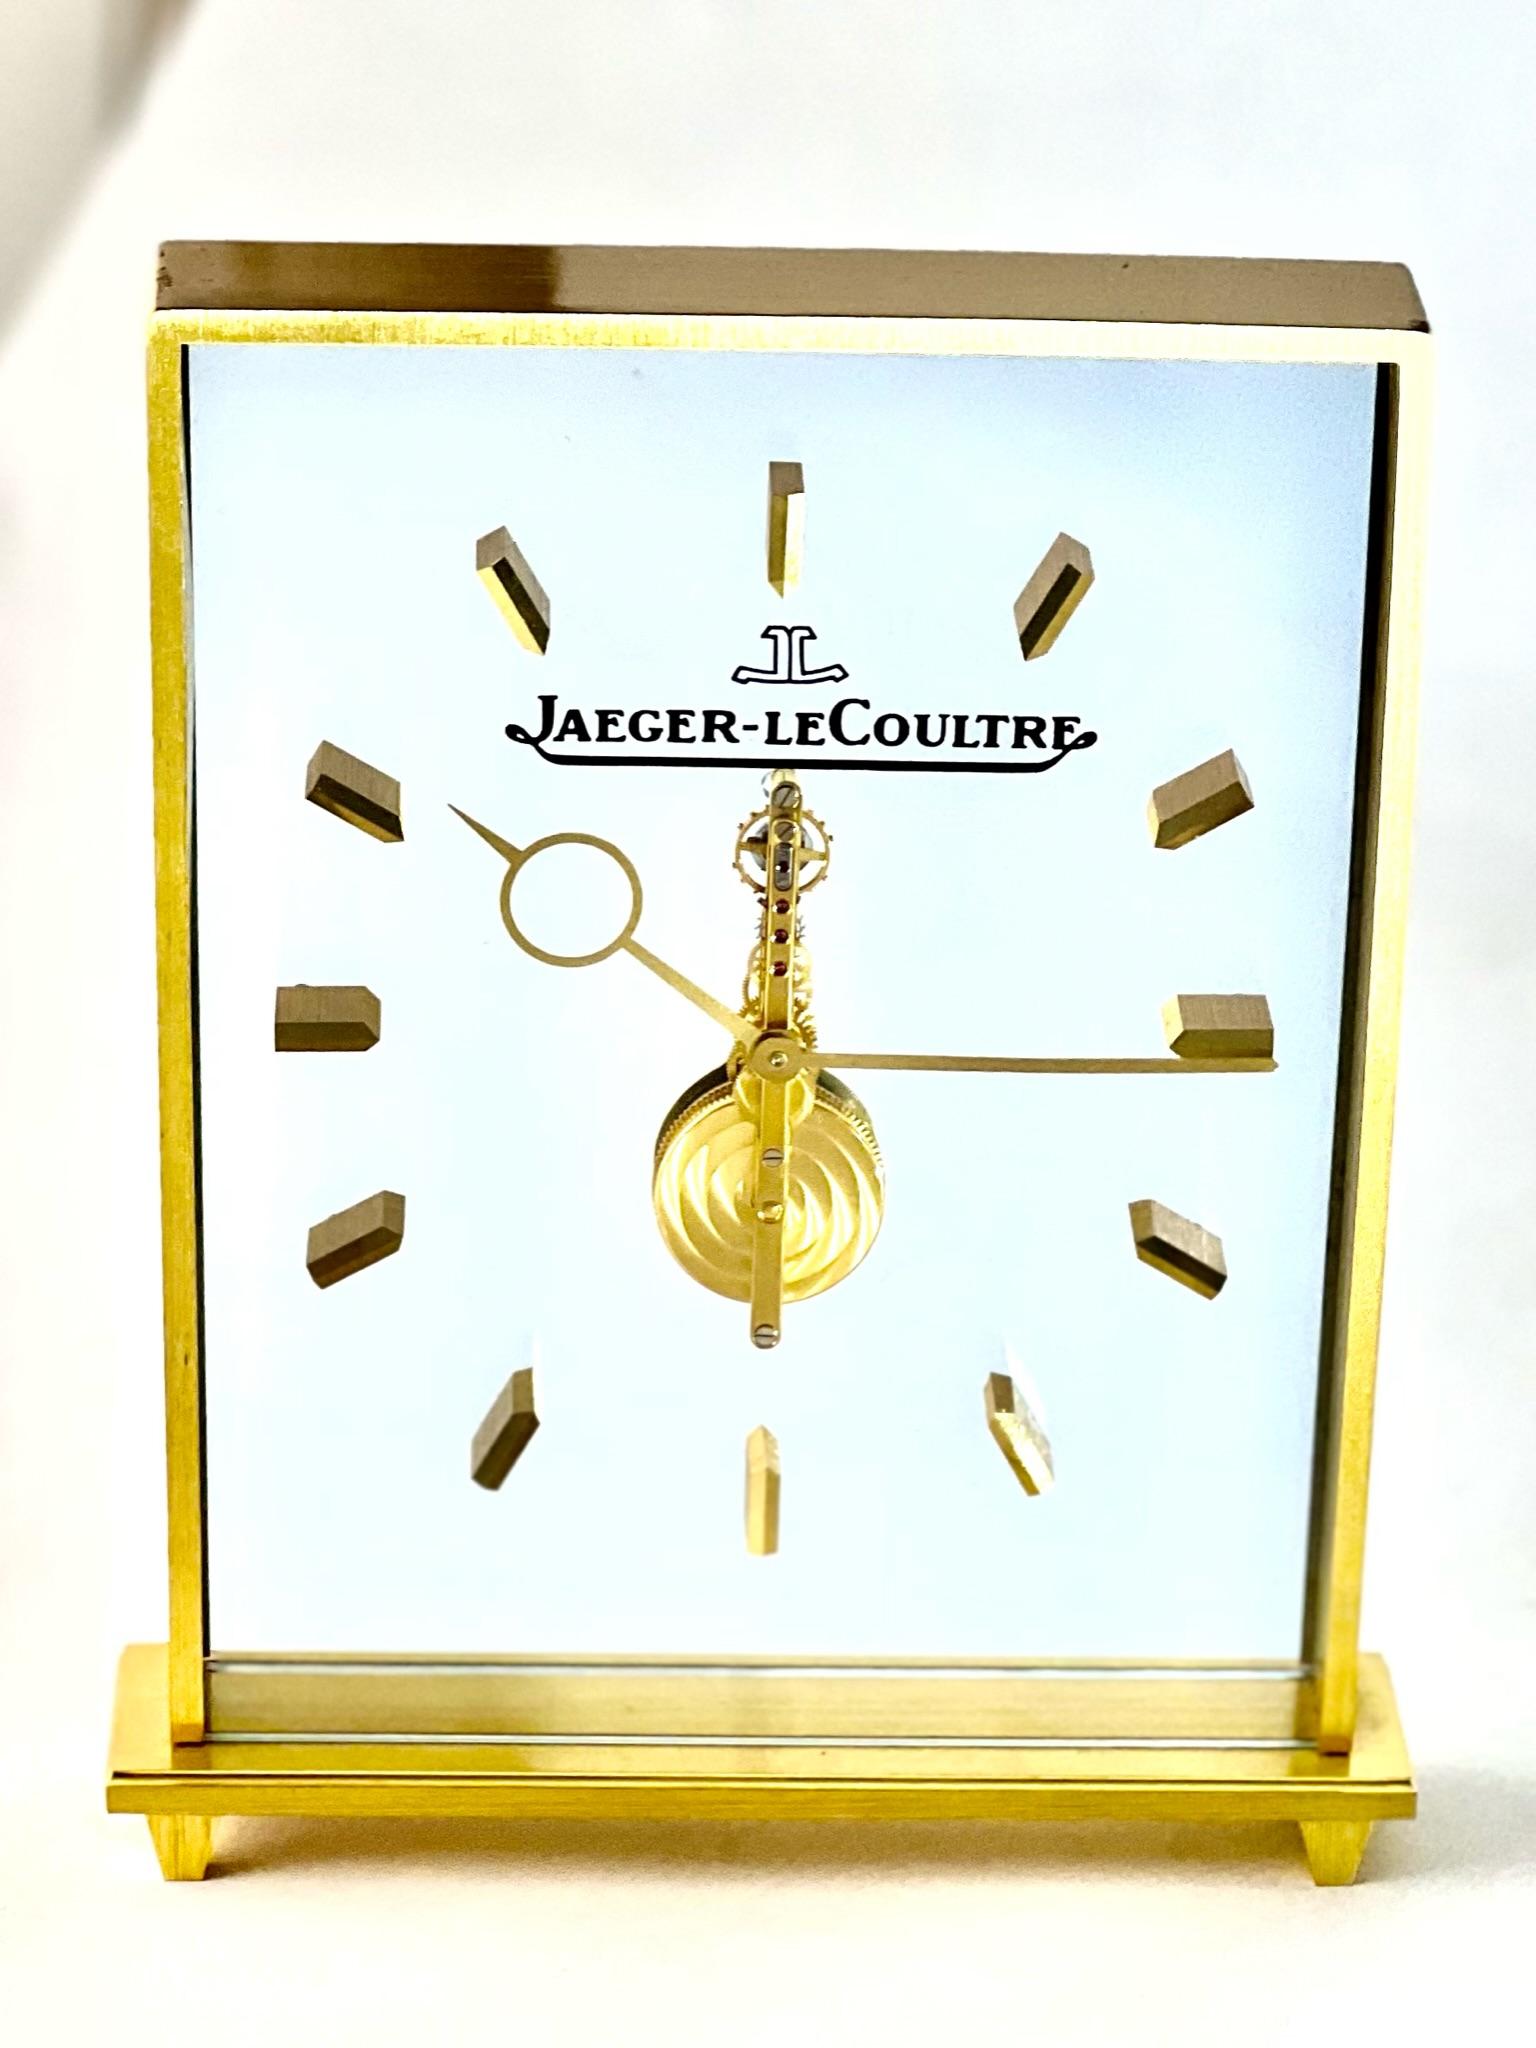 Stunning Jaeger LeCoultre inline skeleton clock, with a clean minimalistic design which would look stylish on a table, mantelpiece of desk. 

The stylish Jaeger LeCoultre logo is visible and lends a stylish ascetic to the clock. 

Made with gilt